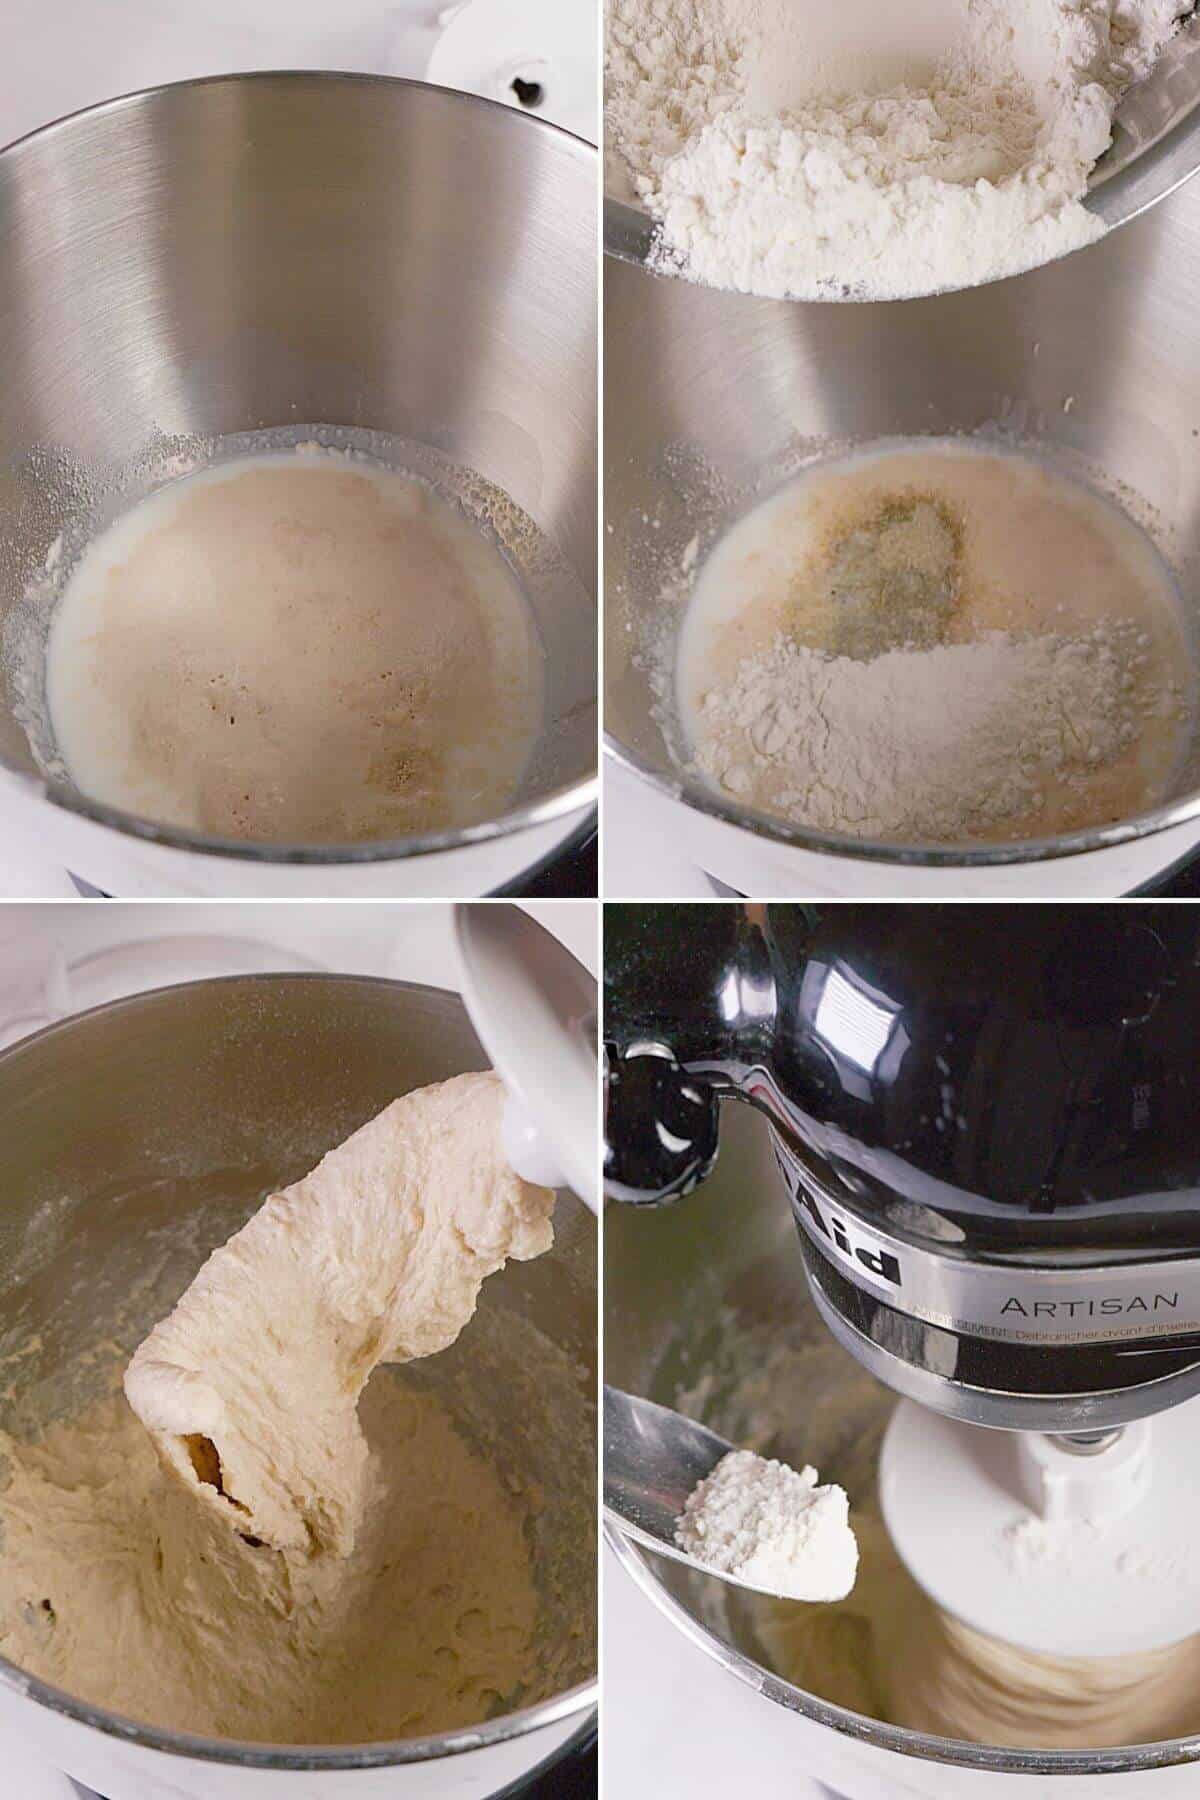 Activating the yeast and making the dough.